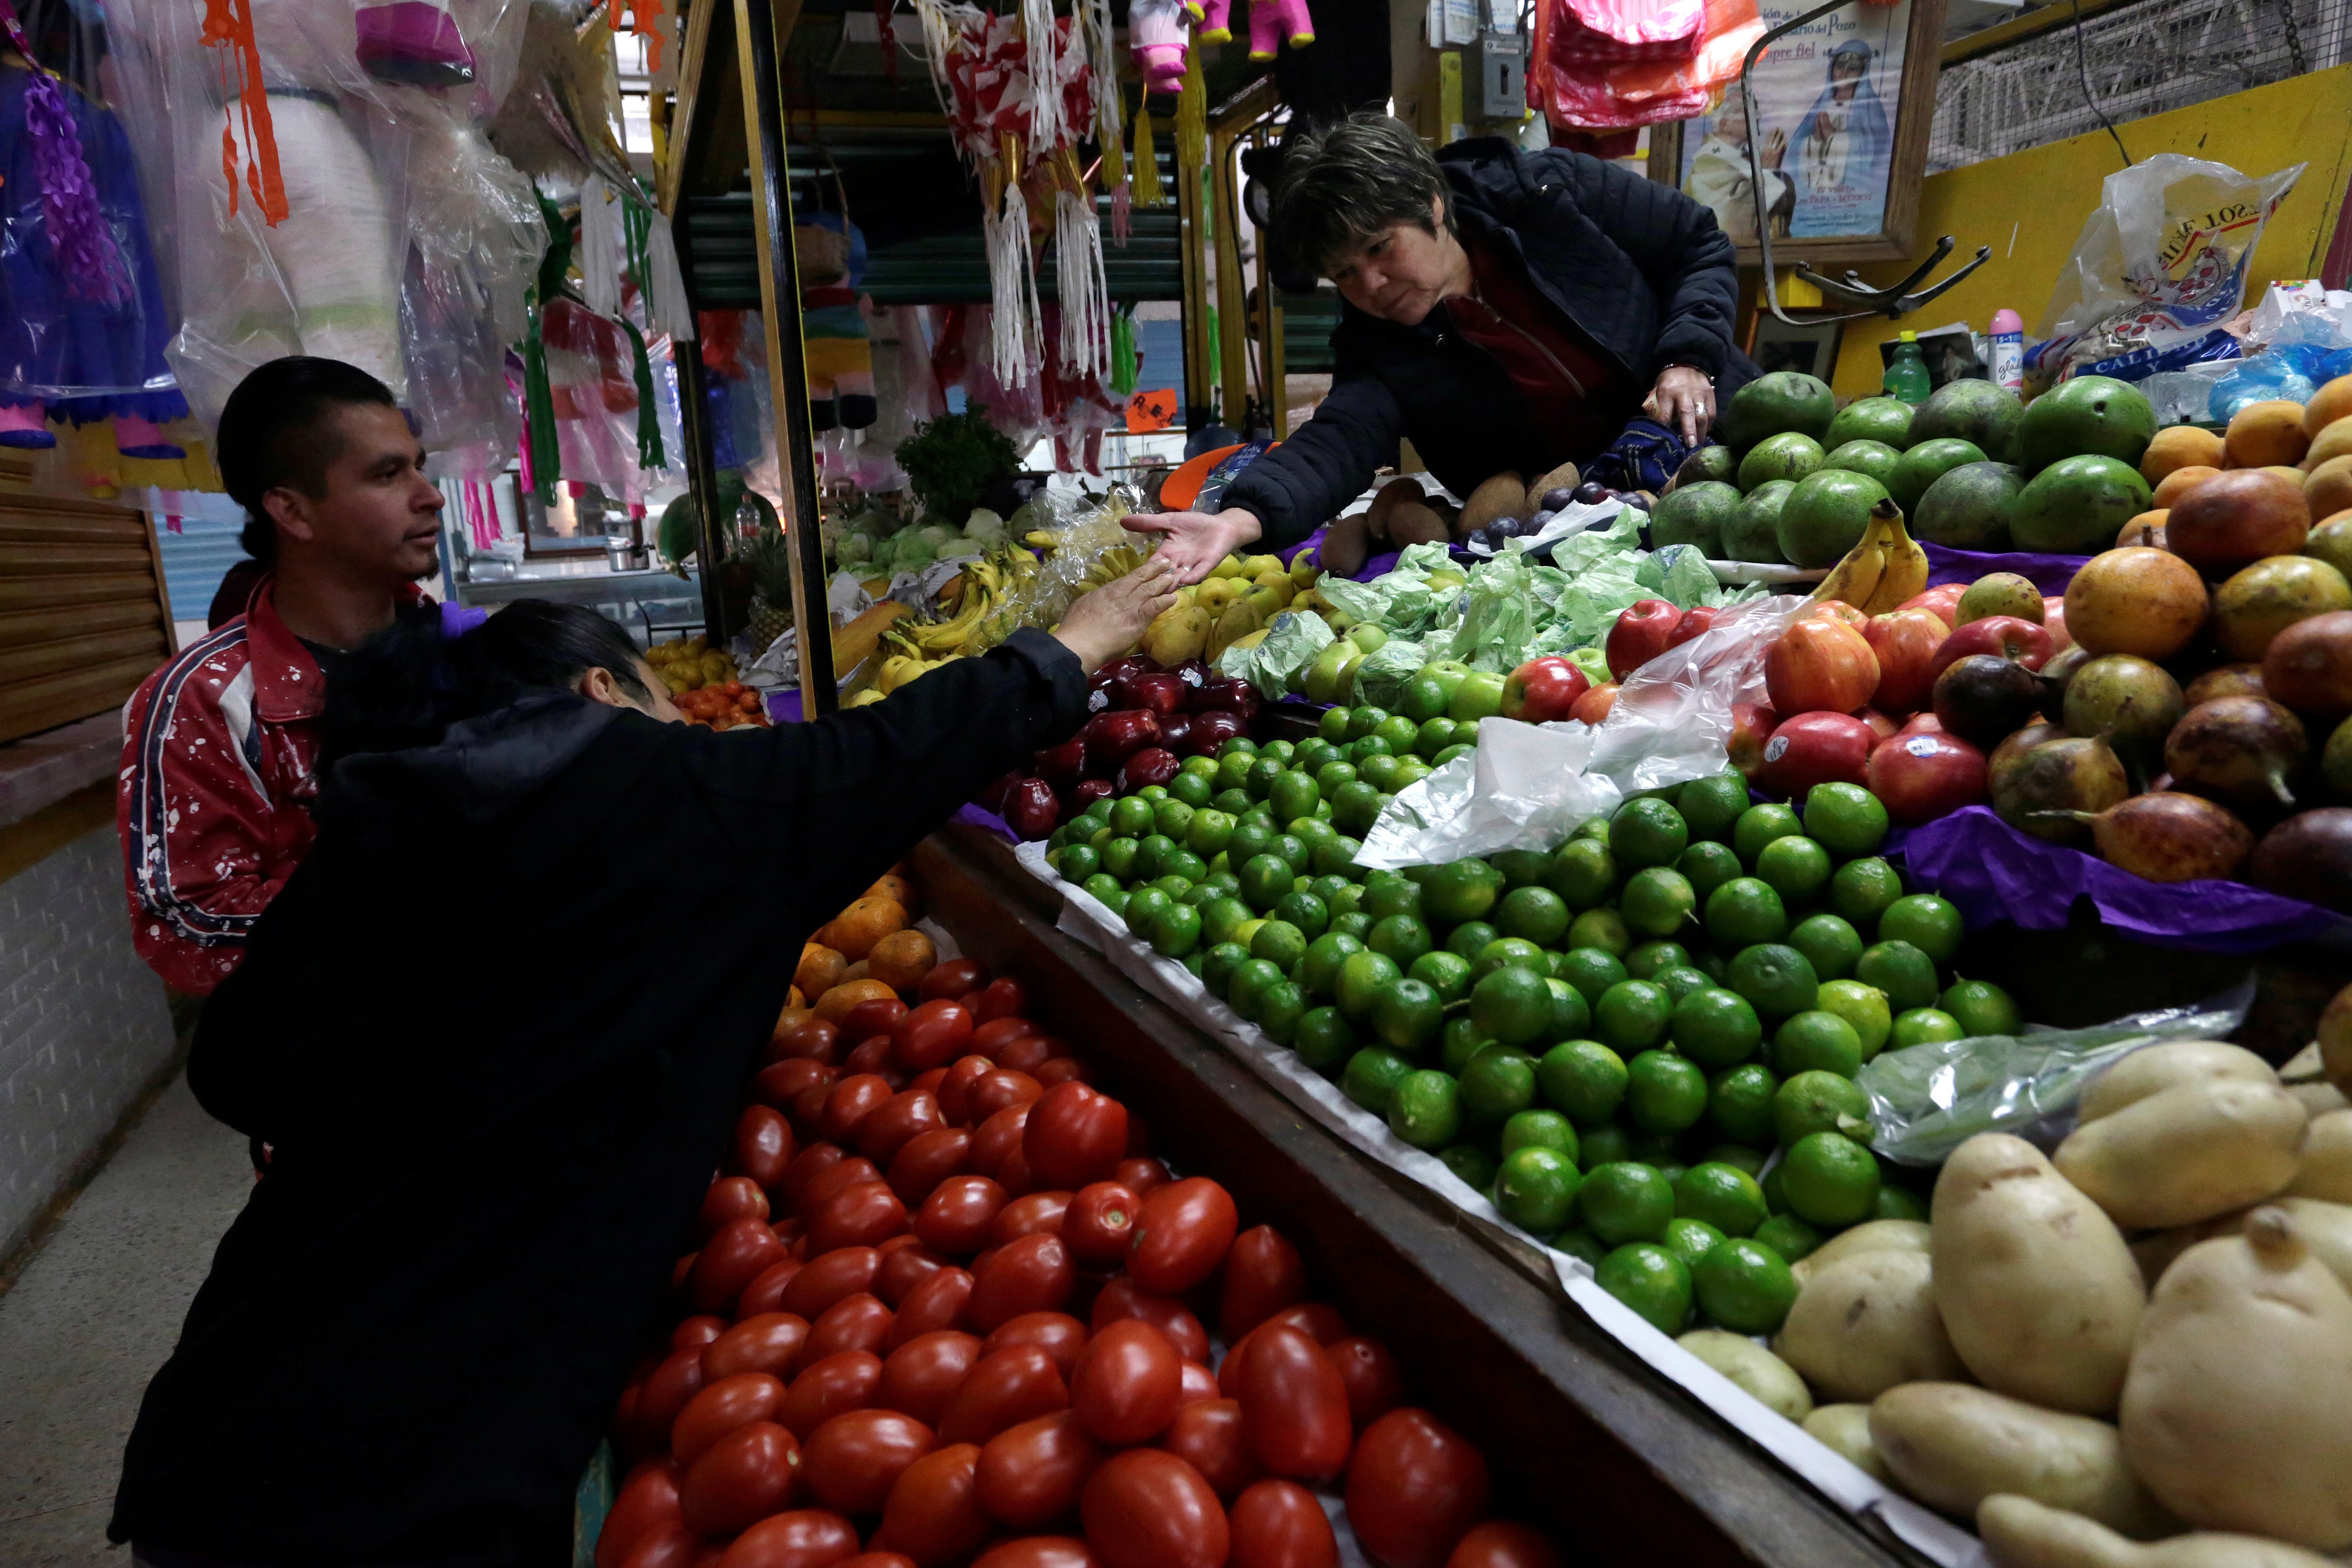 A woman buys vegetables at a market stall in Mexico City, January 2018.